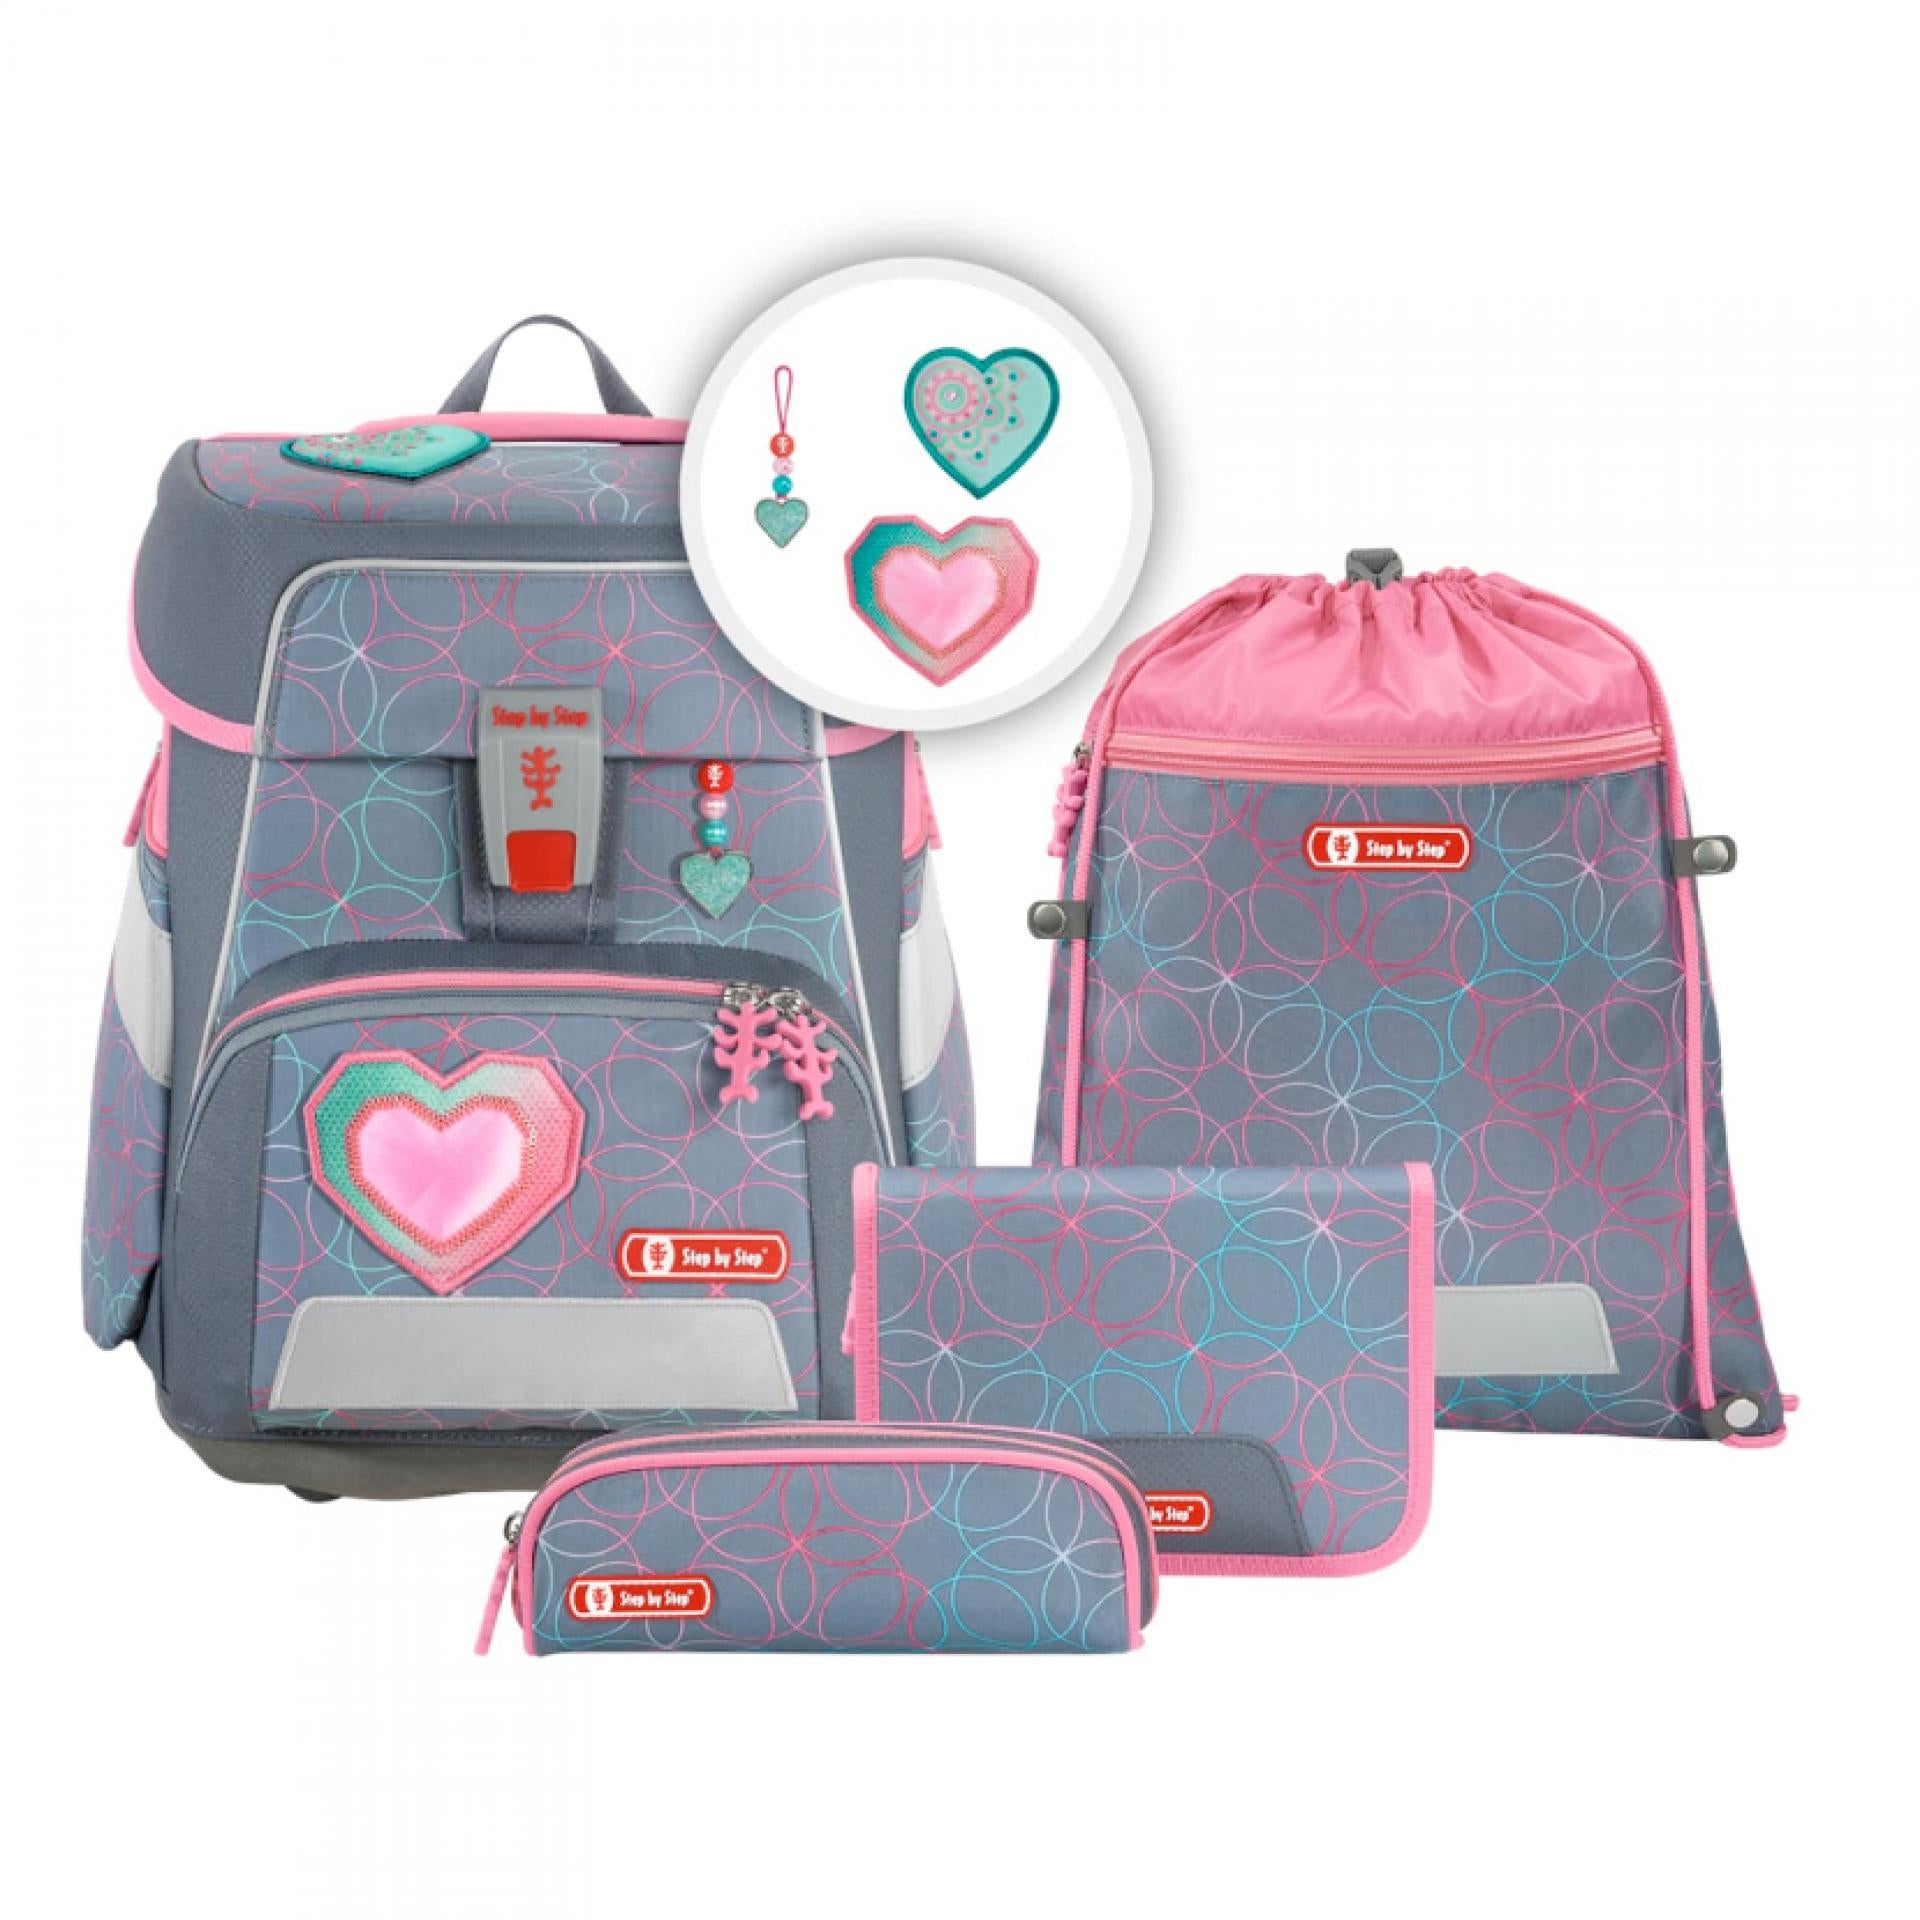 Step by Step SPACE SCHULRA SET GLITTER HEART